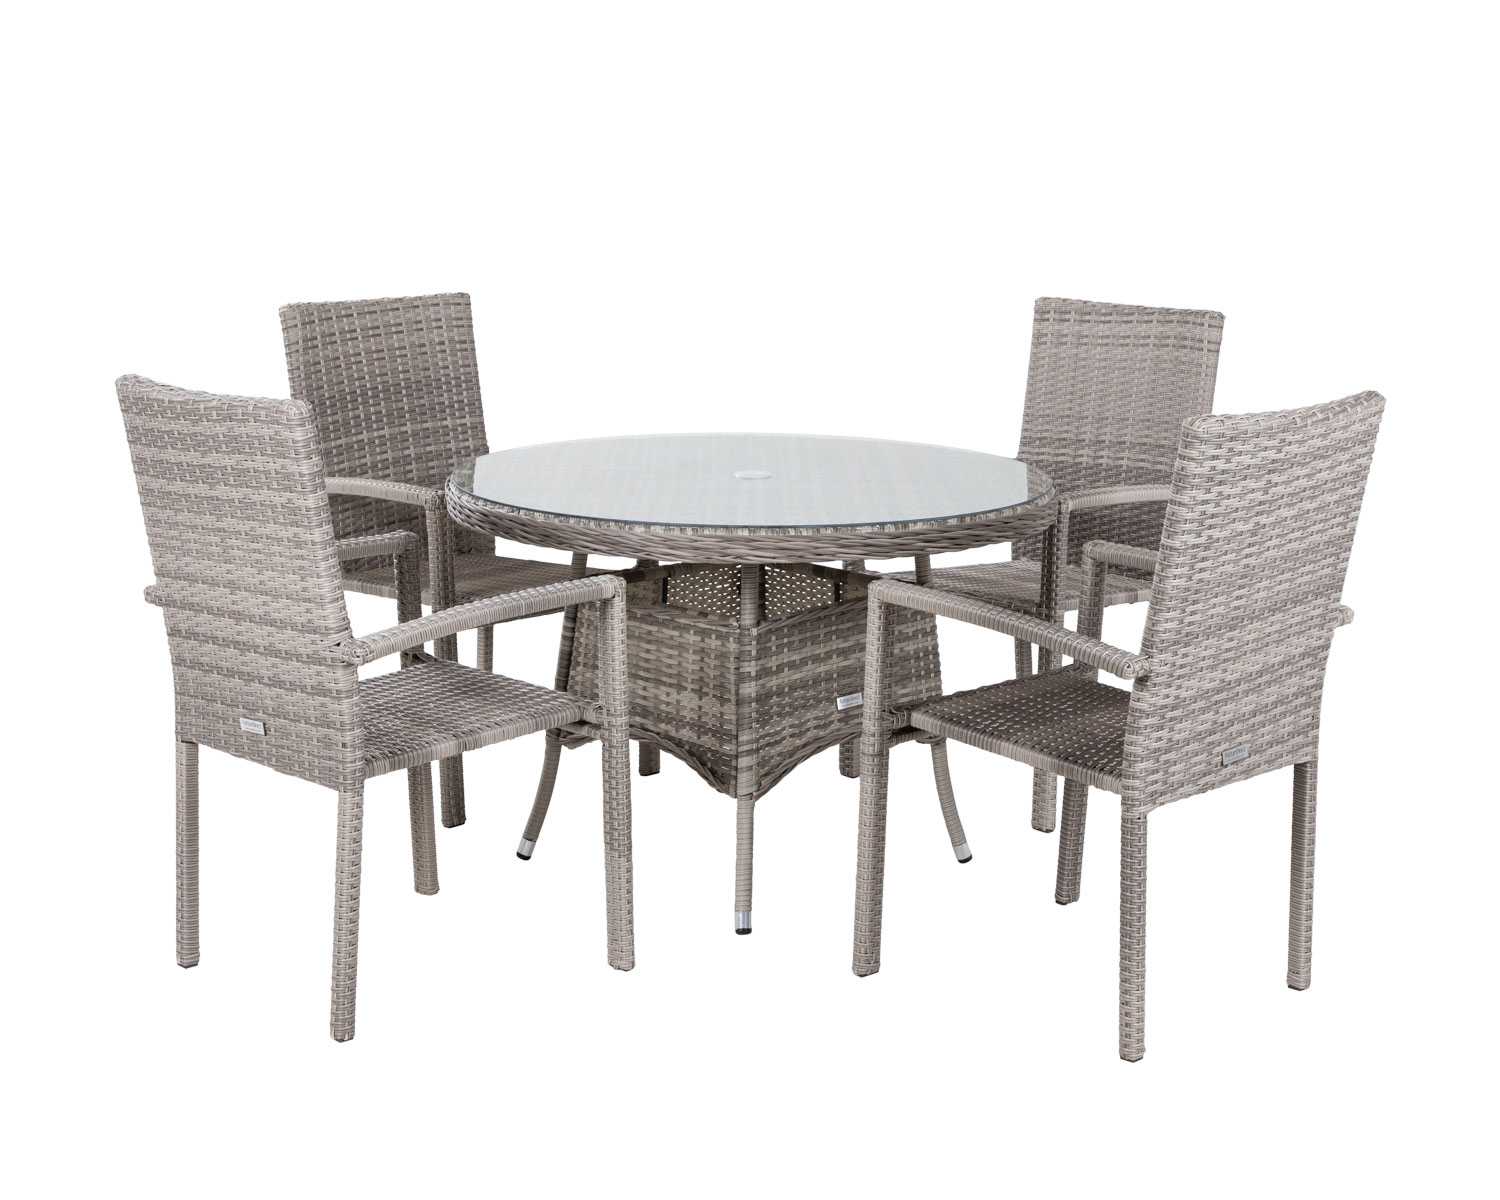 4 Seat Rattan Garden Dining Set With Small Round Dining Table In Grey Rio Rattan Direct